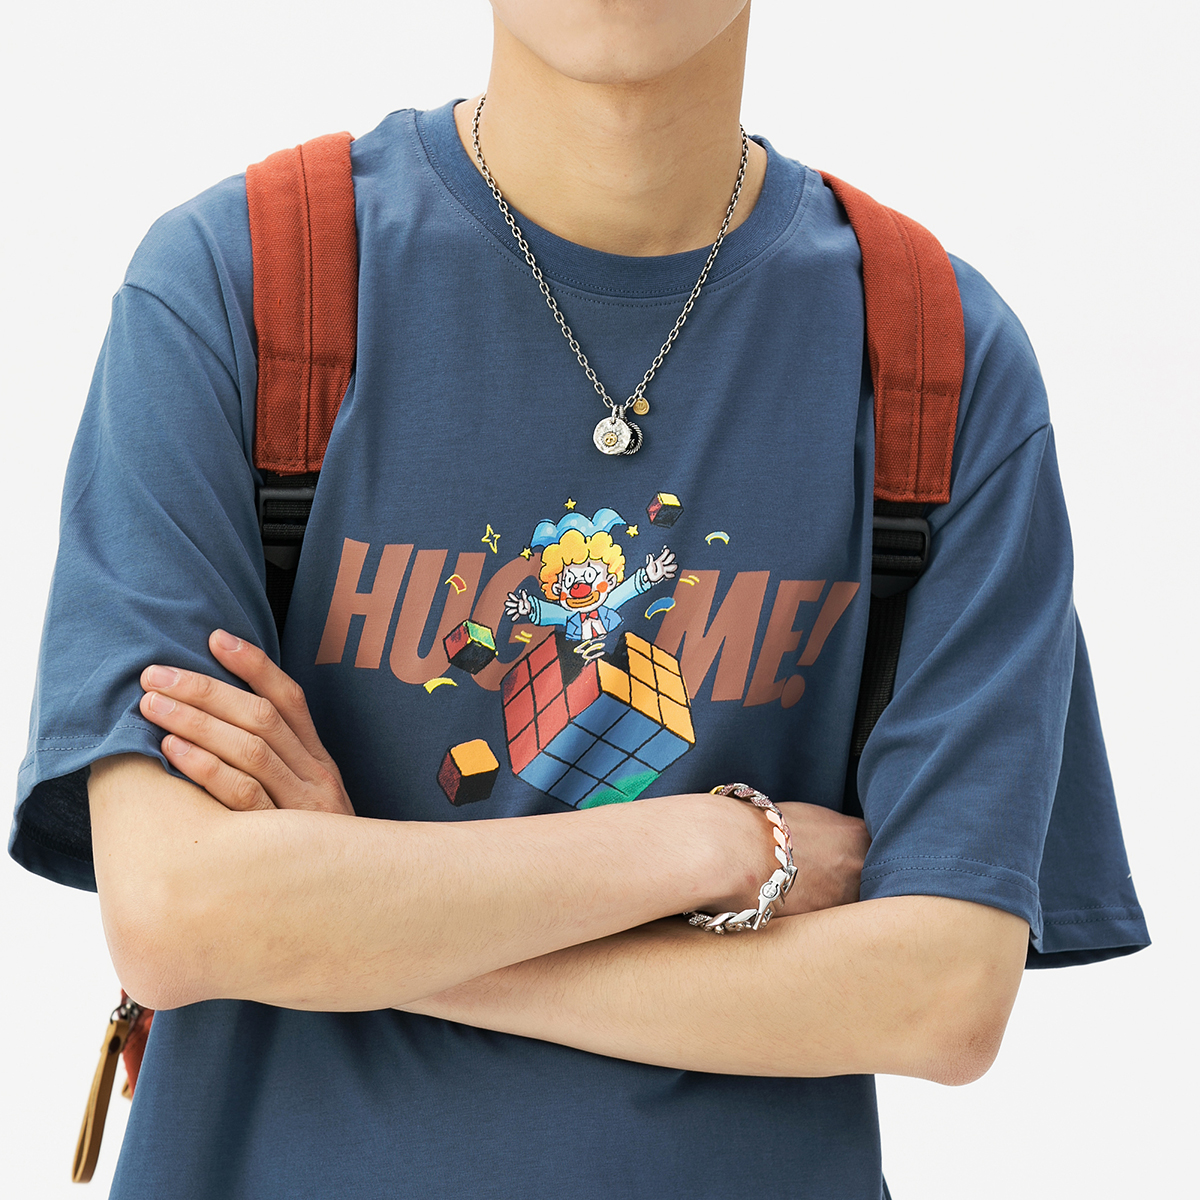 Men T Shirts Graphic Fashion Round Neck Short Sleeve Slim Fit Rubiks Cube Print Casual Cotton Tops Tees 